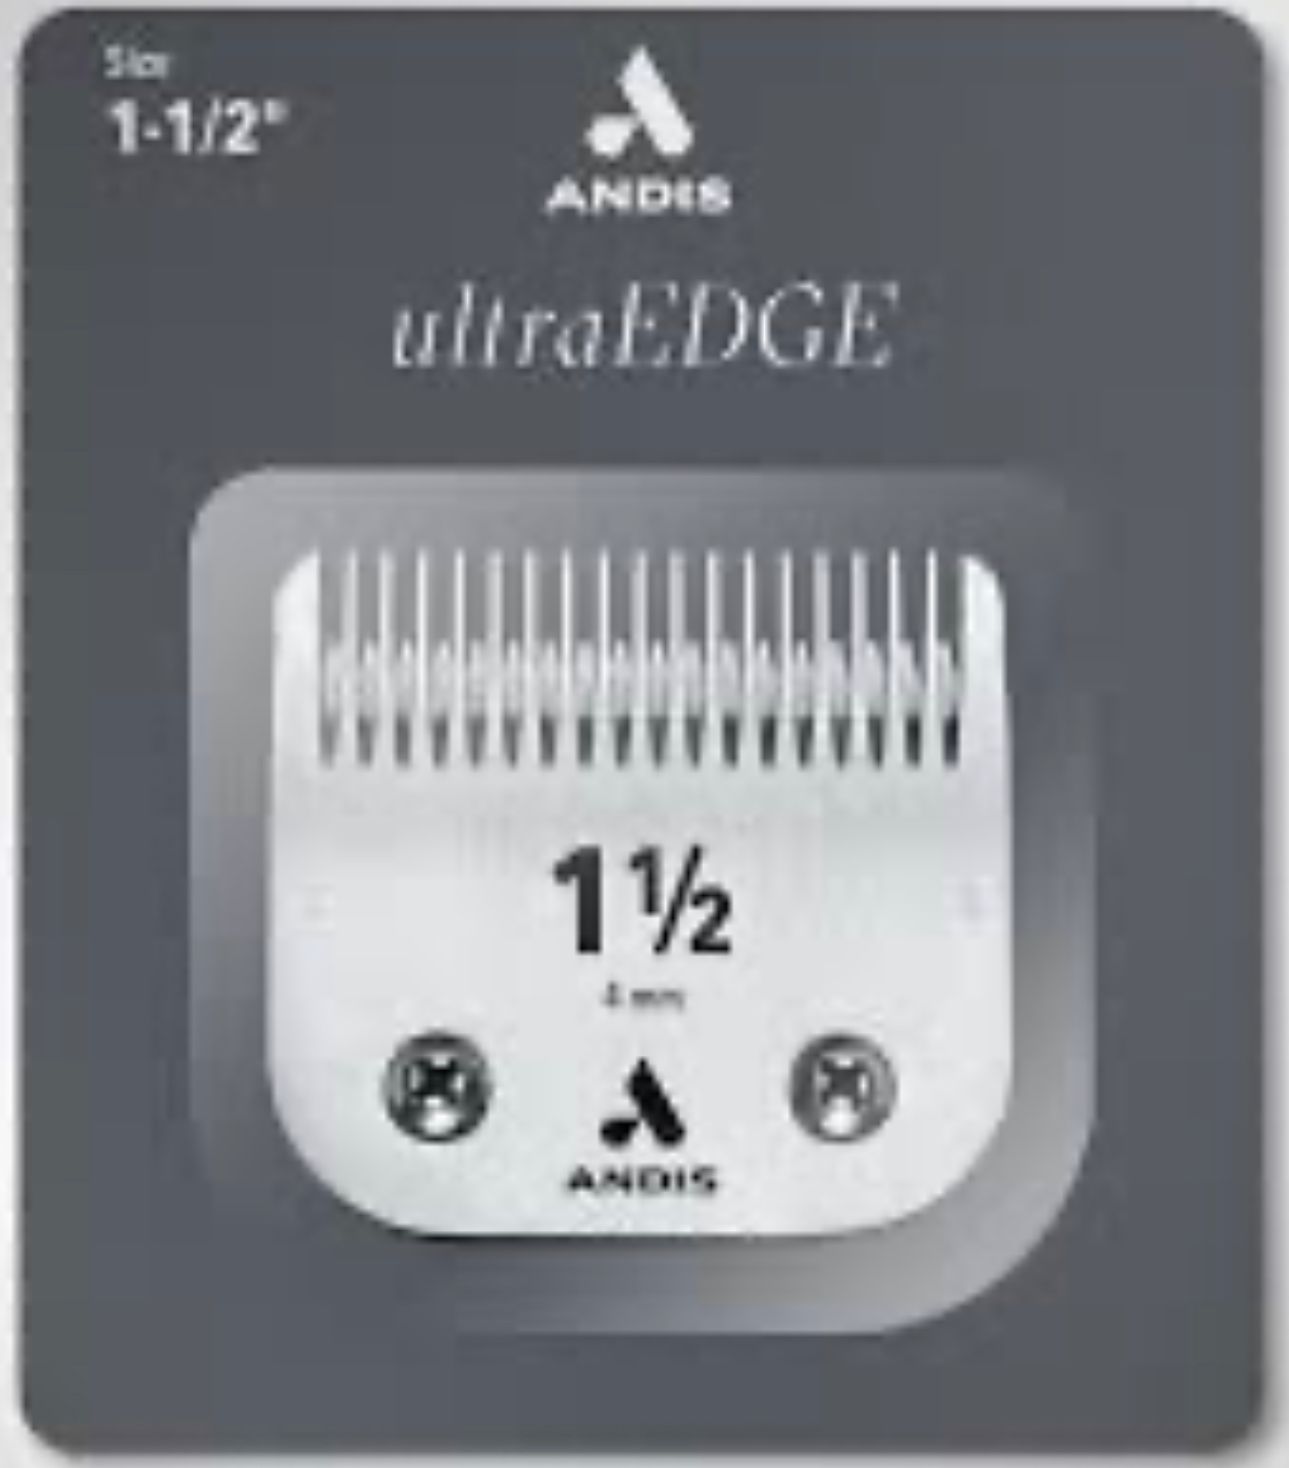 AND560199-ANDIS BLADE SET ULTRAEDGE 1-1/2" #560199(040102003752)